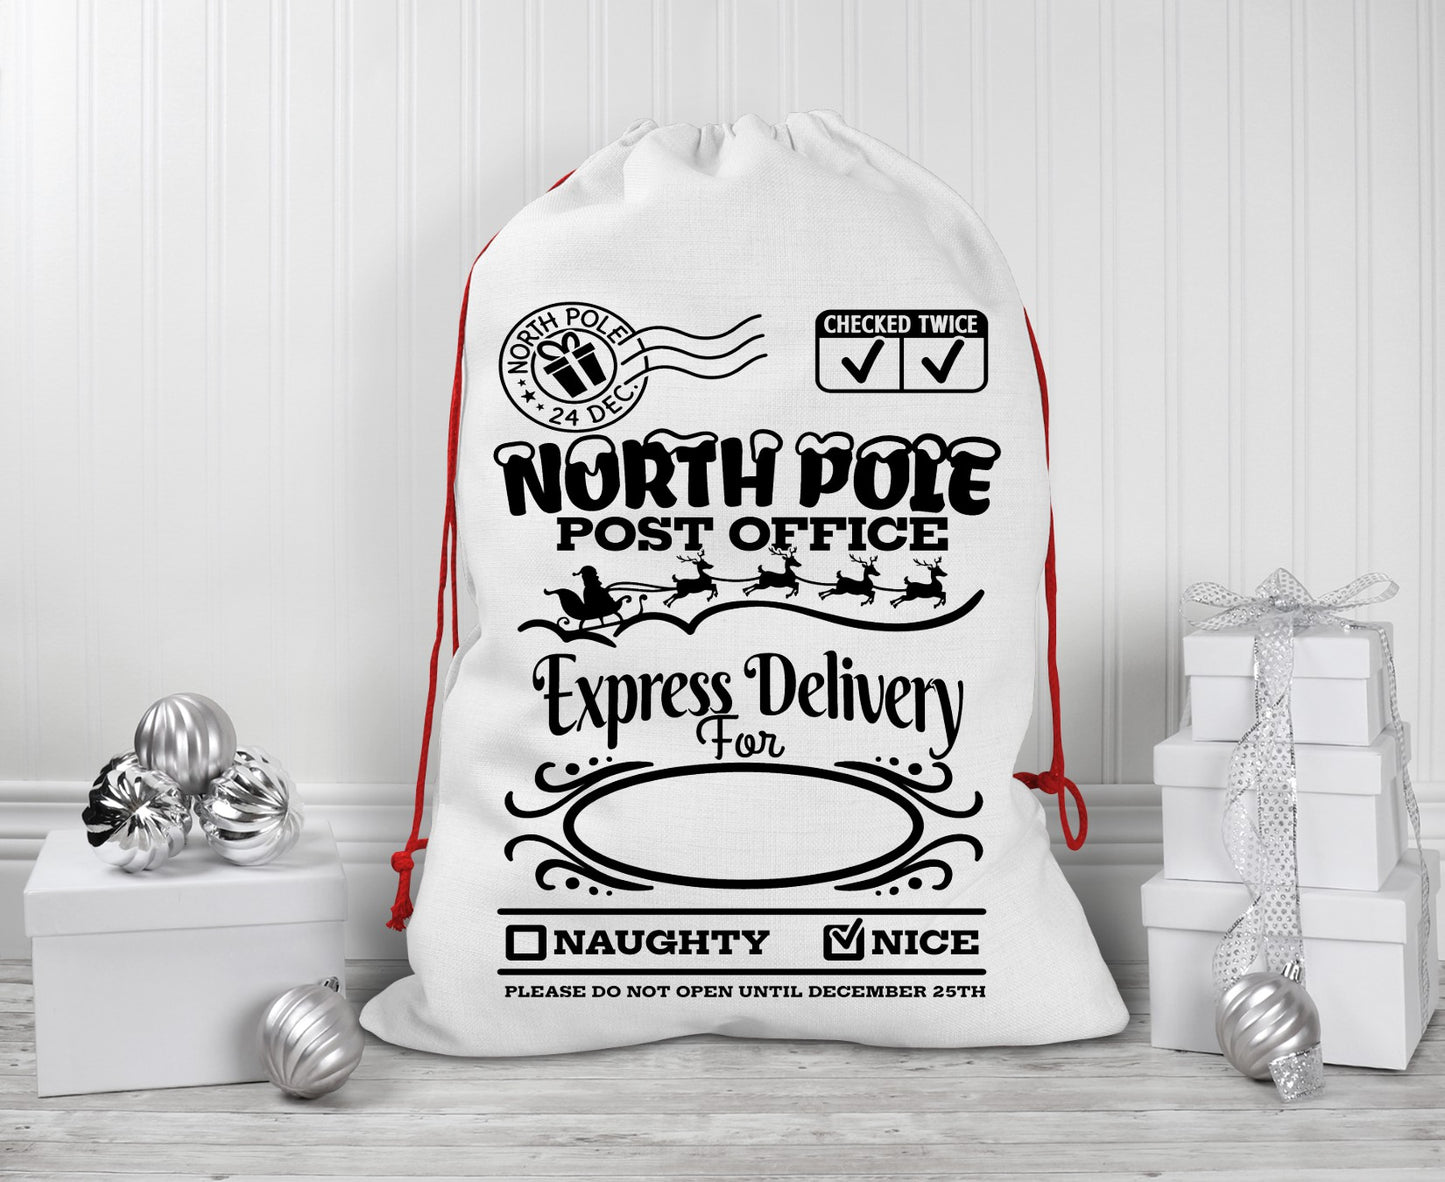 North Pole post office Express delivery - Santa sack size